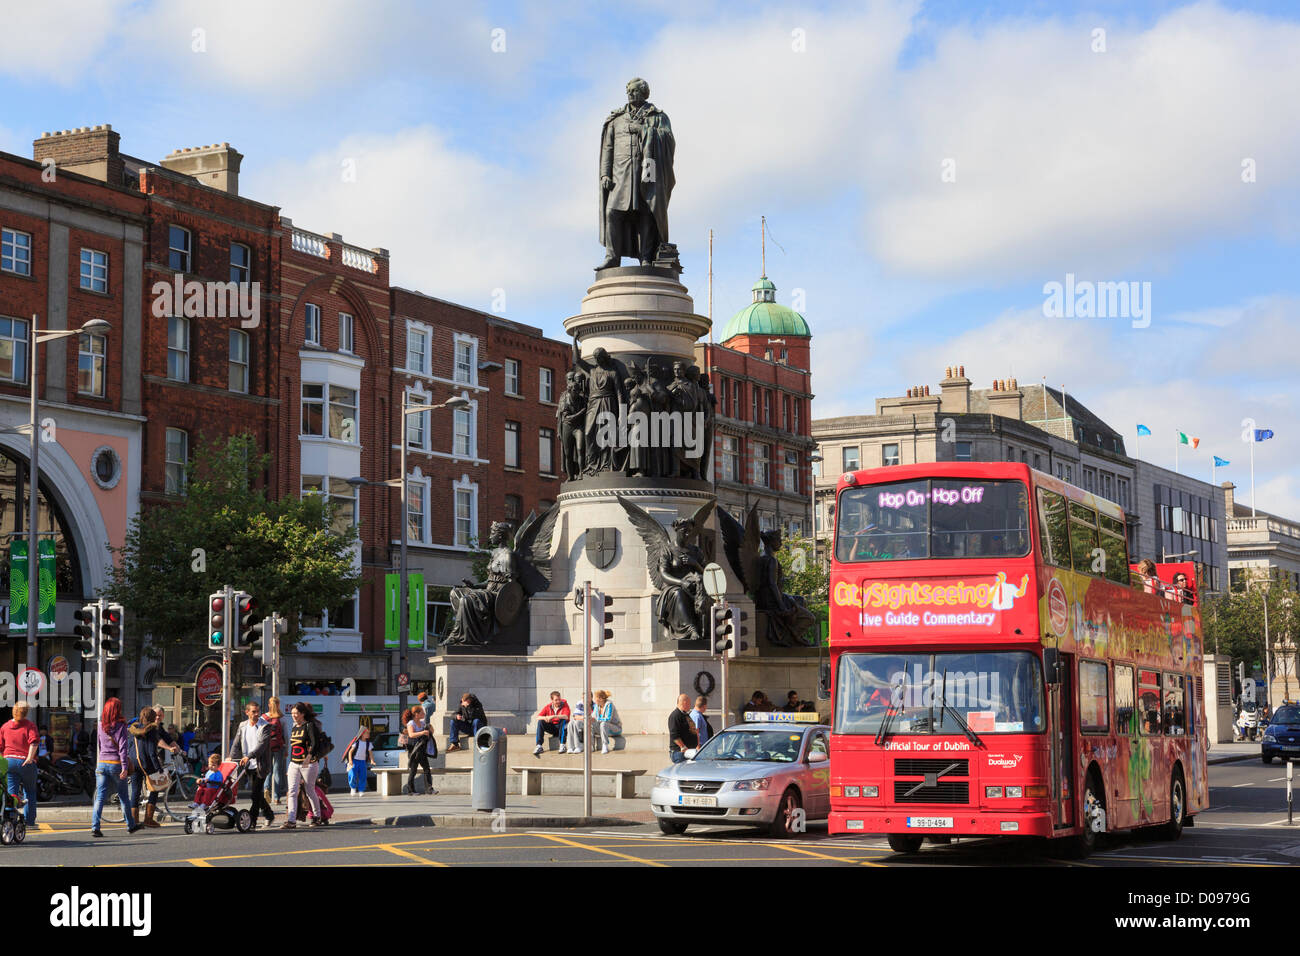 Red double decker Hop on Hop off city sightseeing tour bus passing Daniel O'Connell Monument on street. Dublin city Ireland Eire Stock Photo